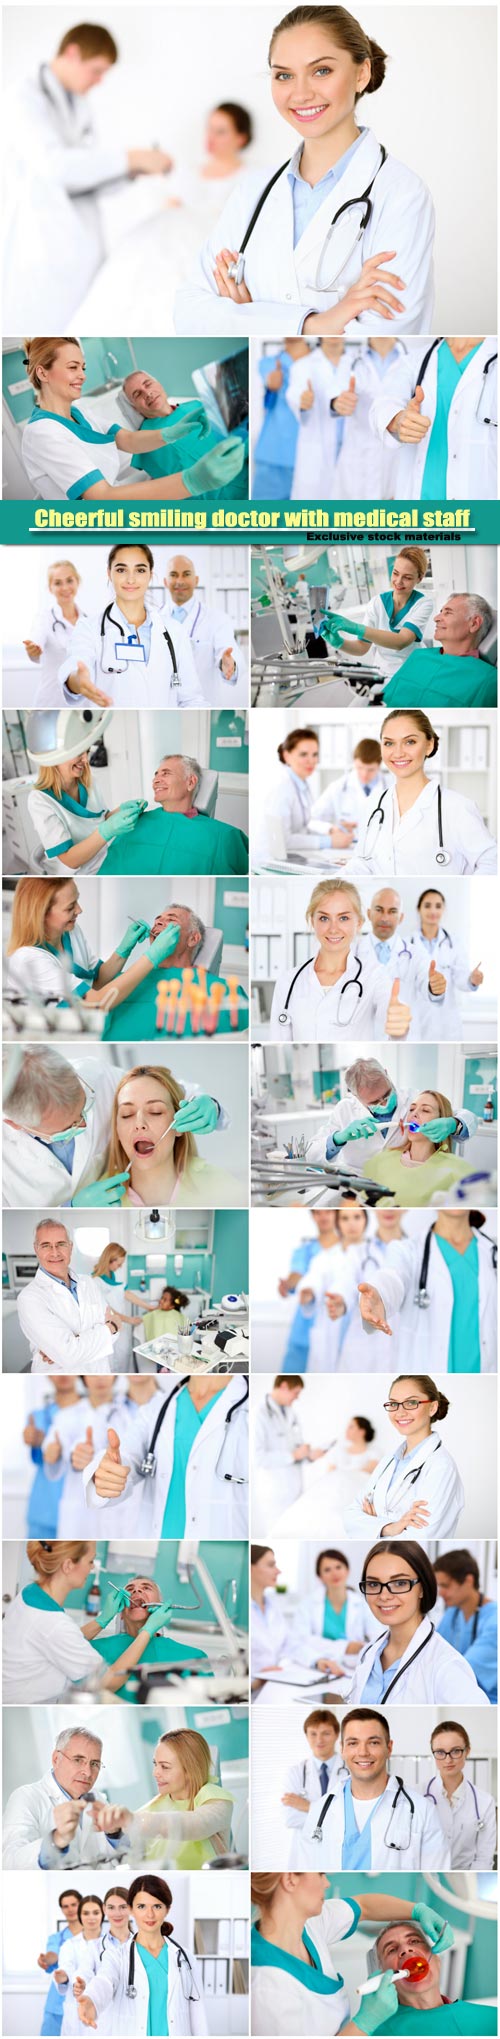 Cheerful smiling doctor with medical staff at the hospital, experienced dentist in dental practice